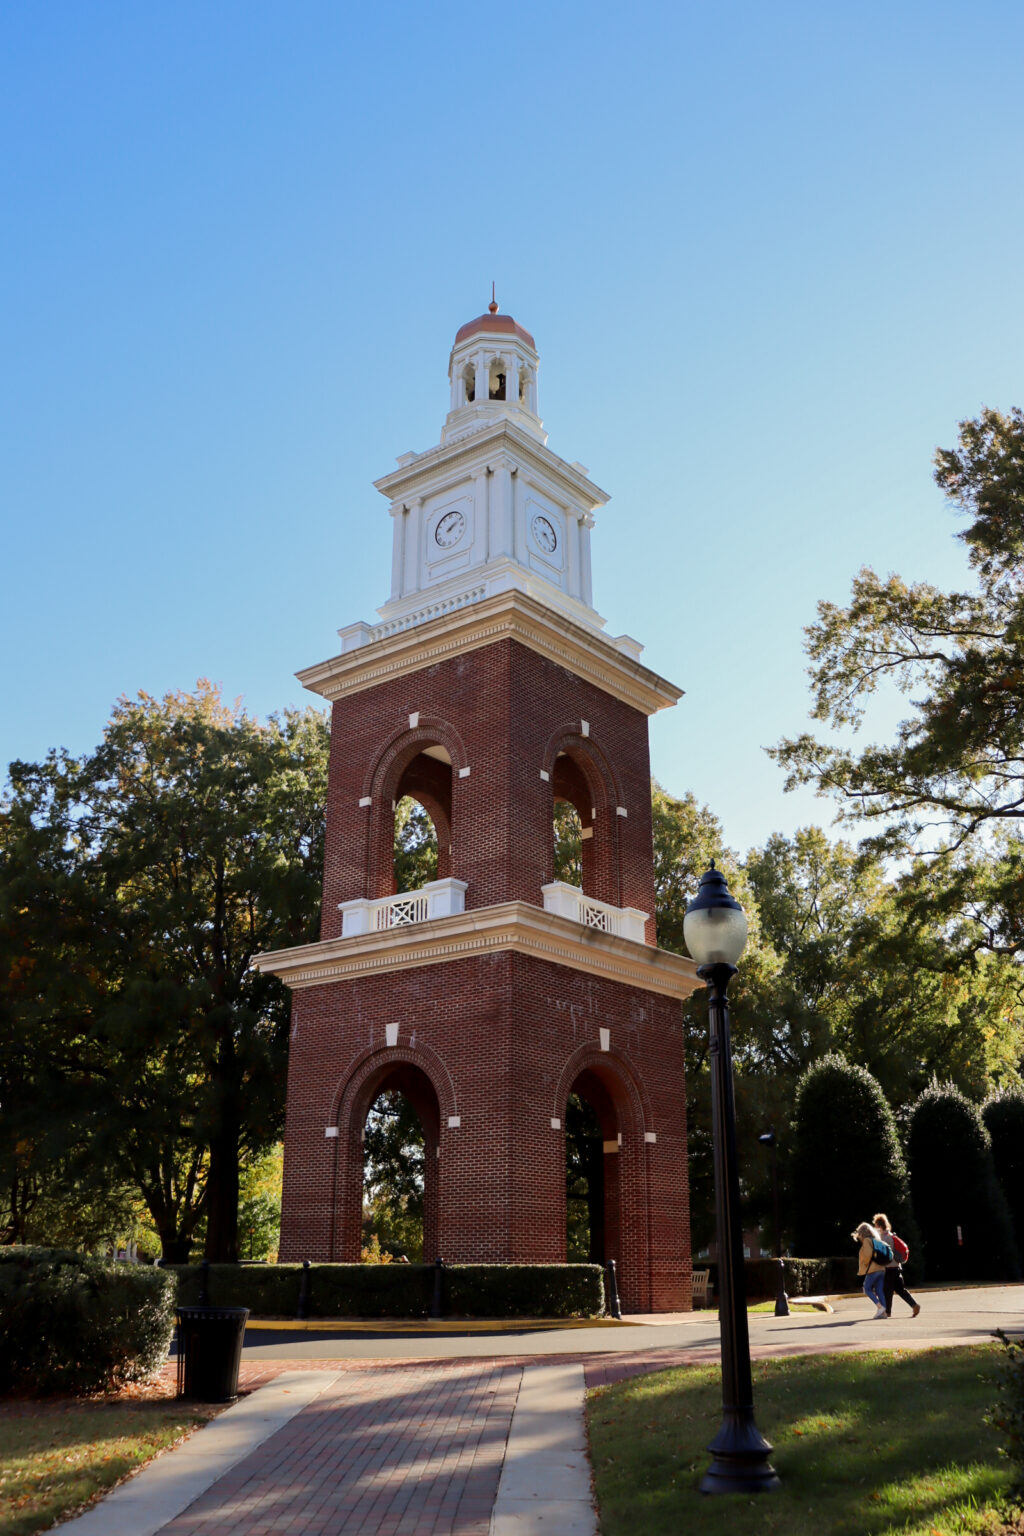 The Bell Tower, a tall building made of brick with a clock and bell at the top